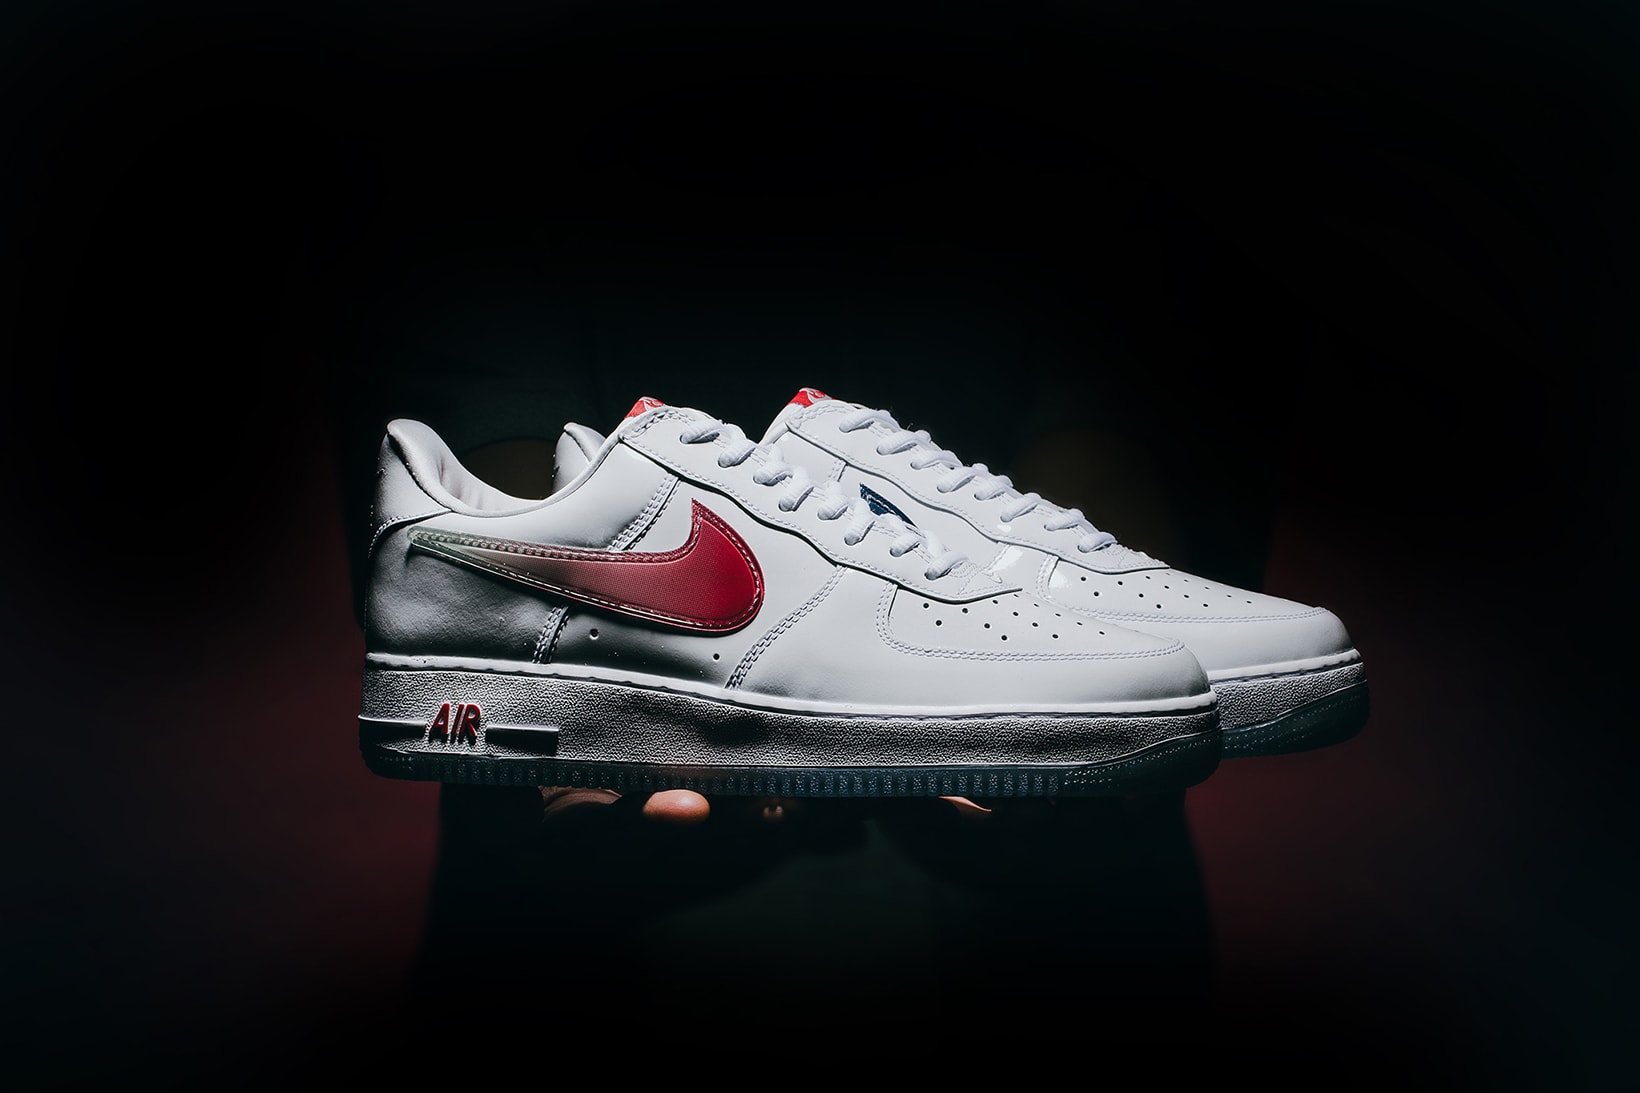 Nike Air Force 1 Low Taiwan 2018 Retro release date info drop sneakers shoes footwear invincible march 17 2018